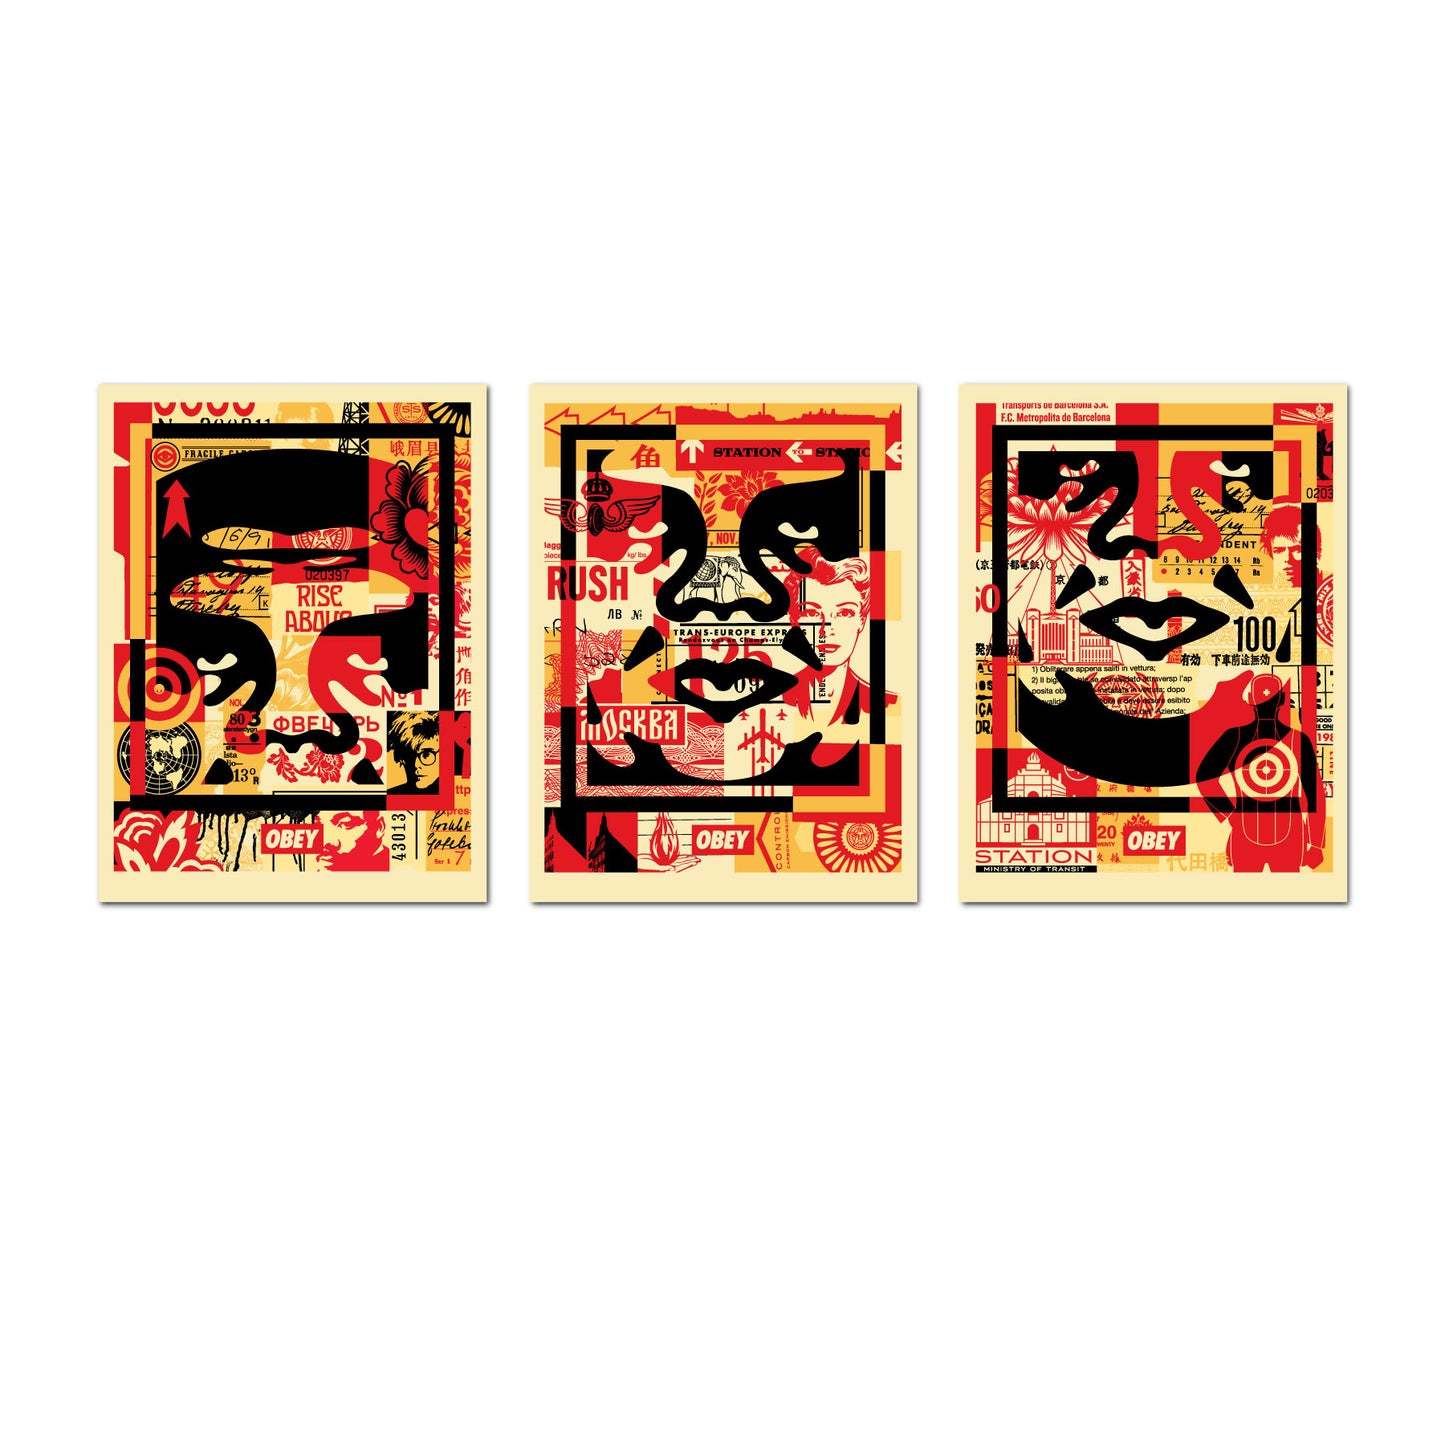 OBEY 3-FACE COLLAGE 18x24 Signed Offset Lithograph Set